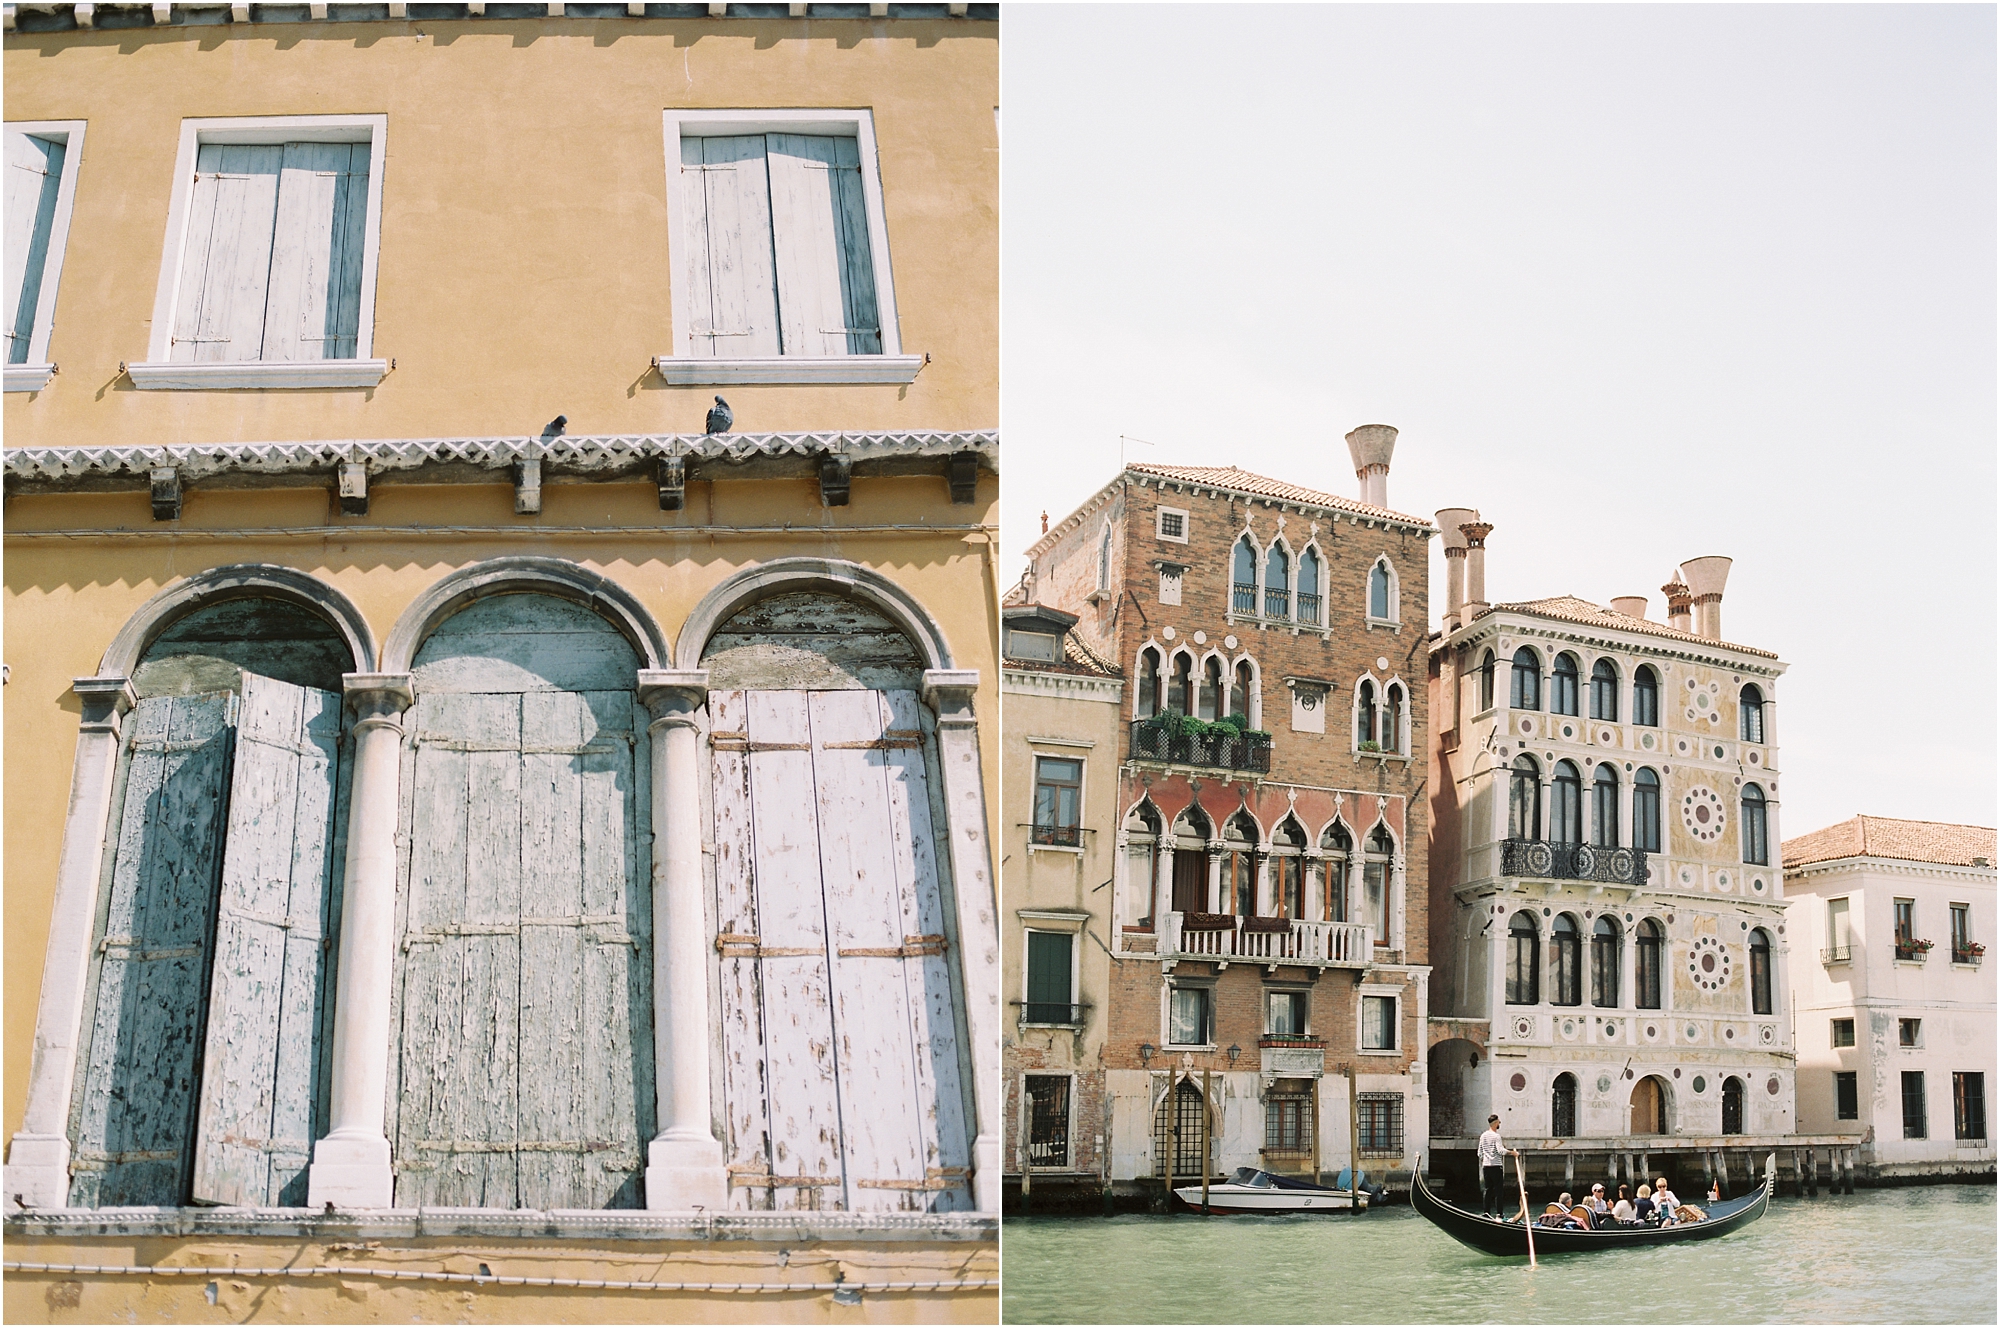 Buildings along canal in Venice Italy